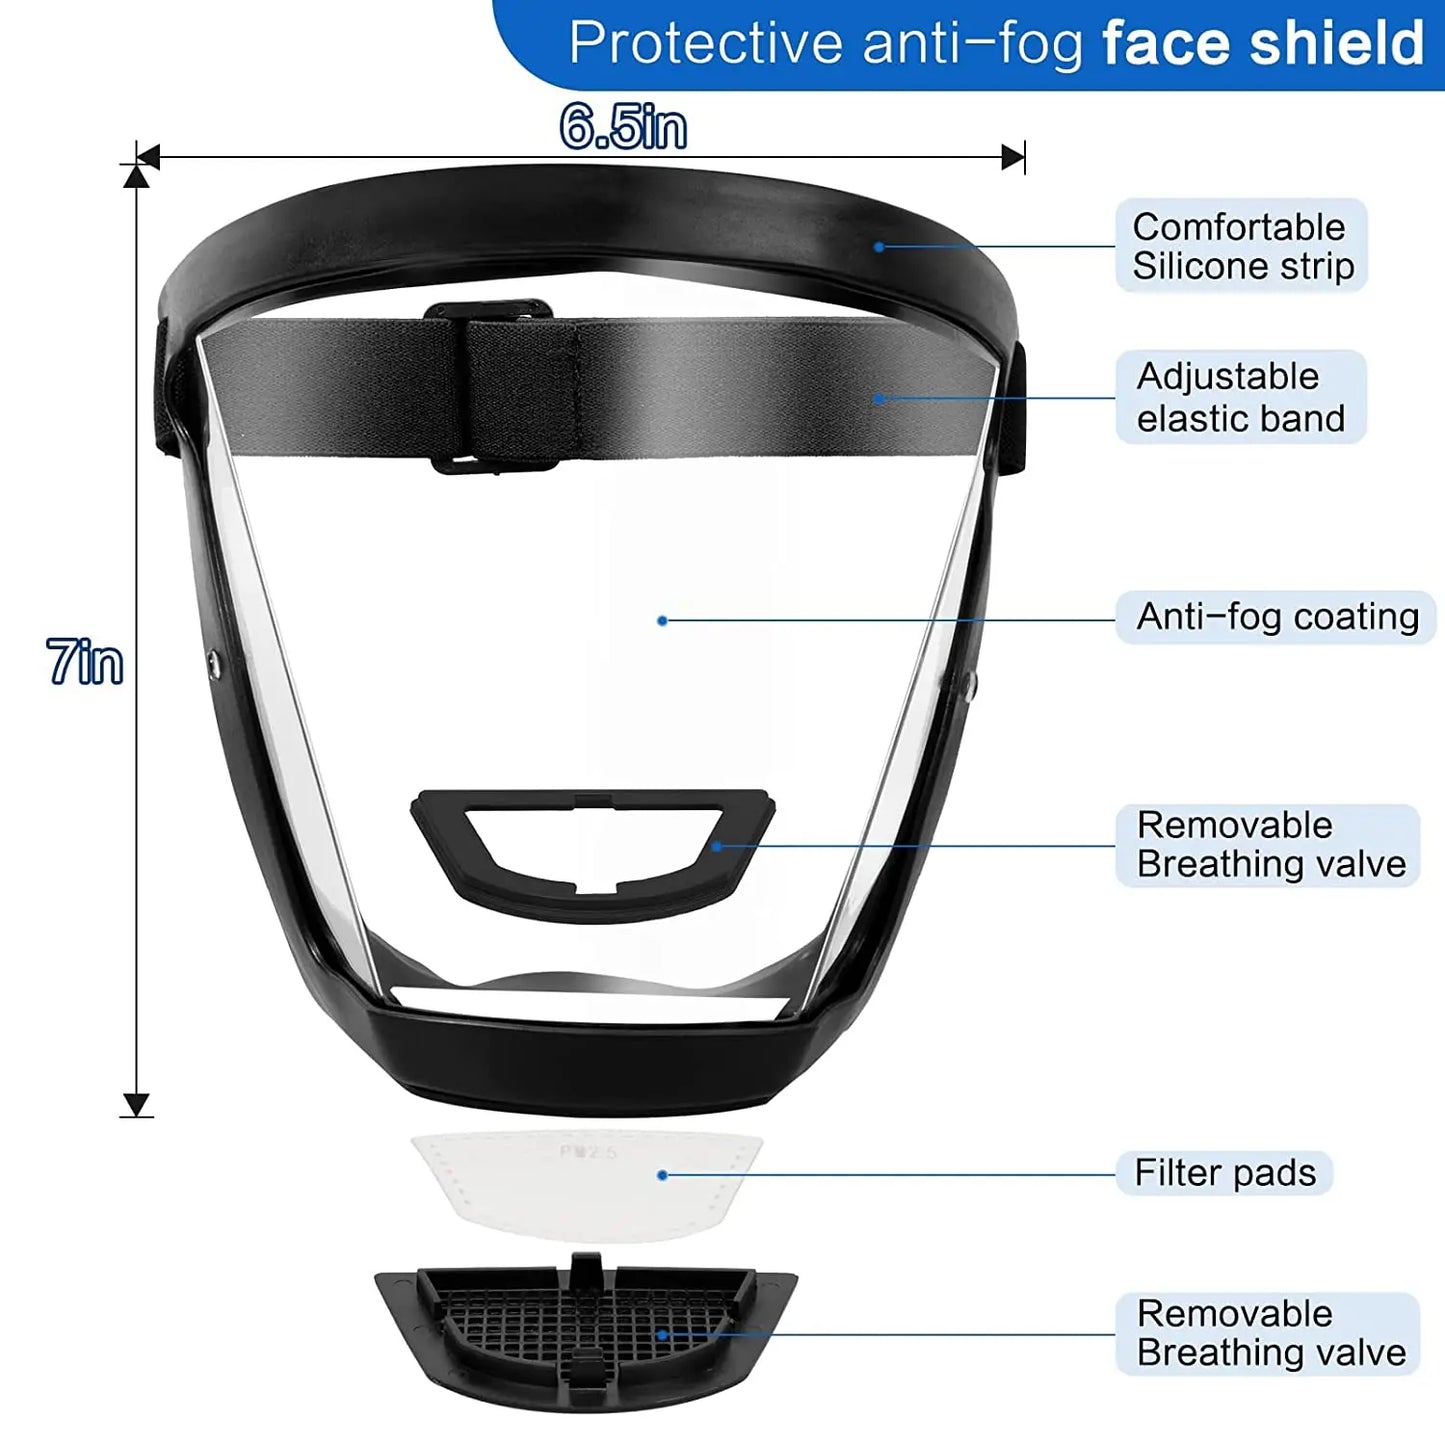 Full Face Shield for Kitchen